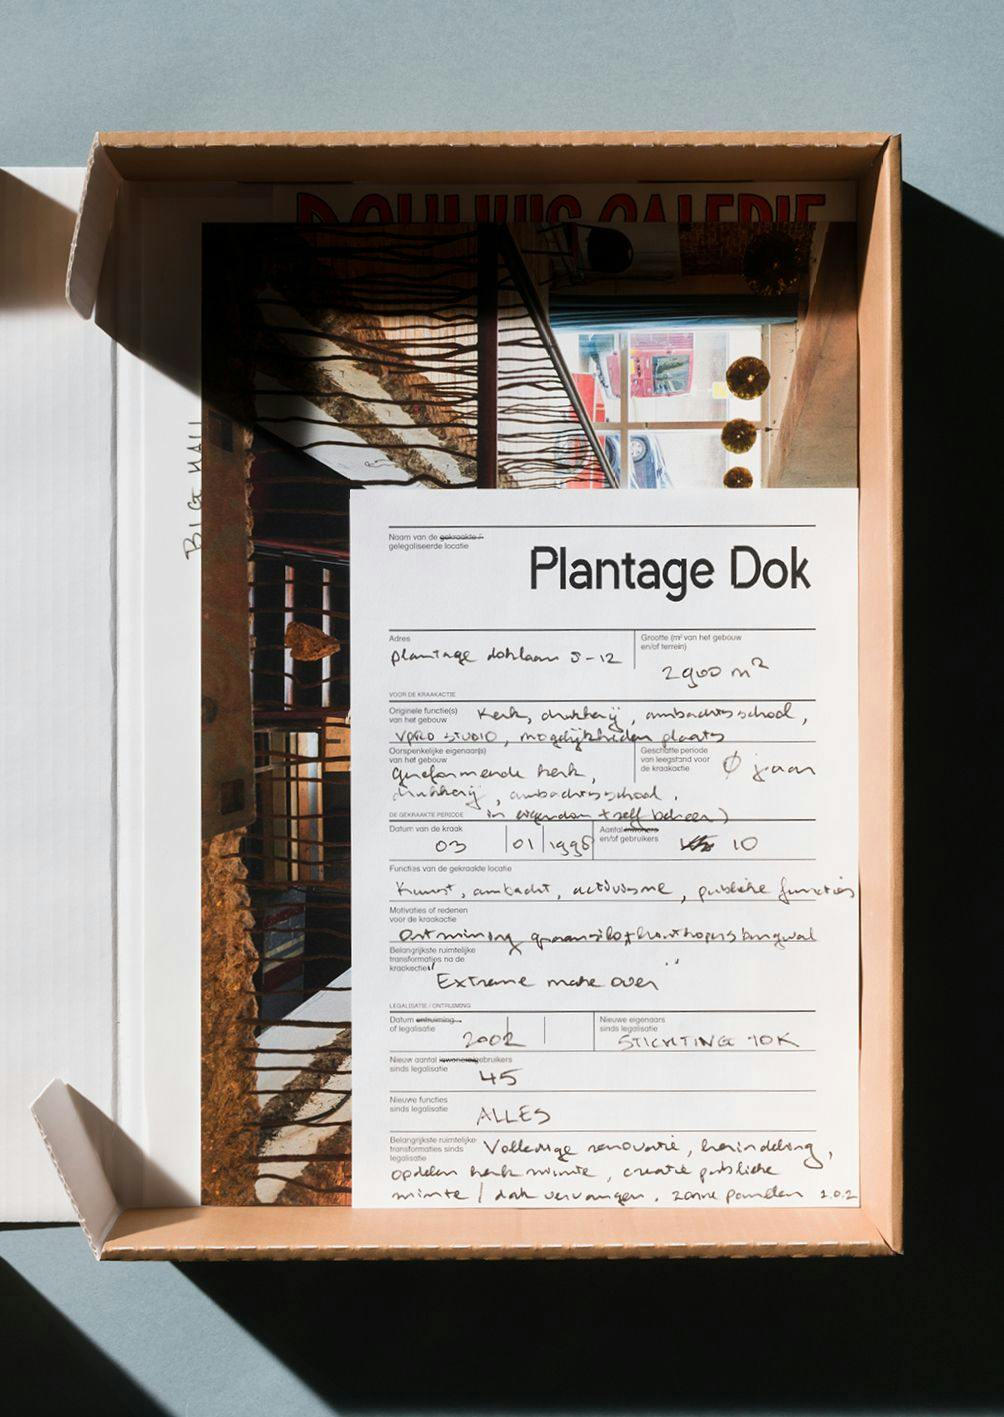 Plantage Dok. From: Architecture of Appropriation. On Squatting as Spatial Practice. Photo by Johannes Schwartz. 